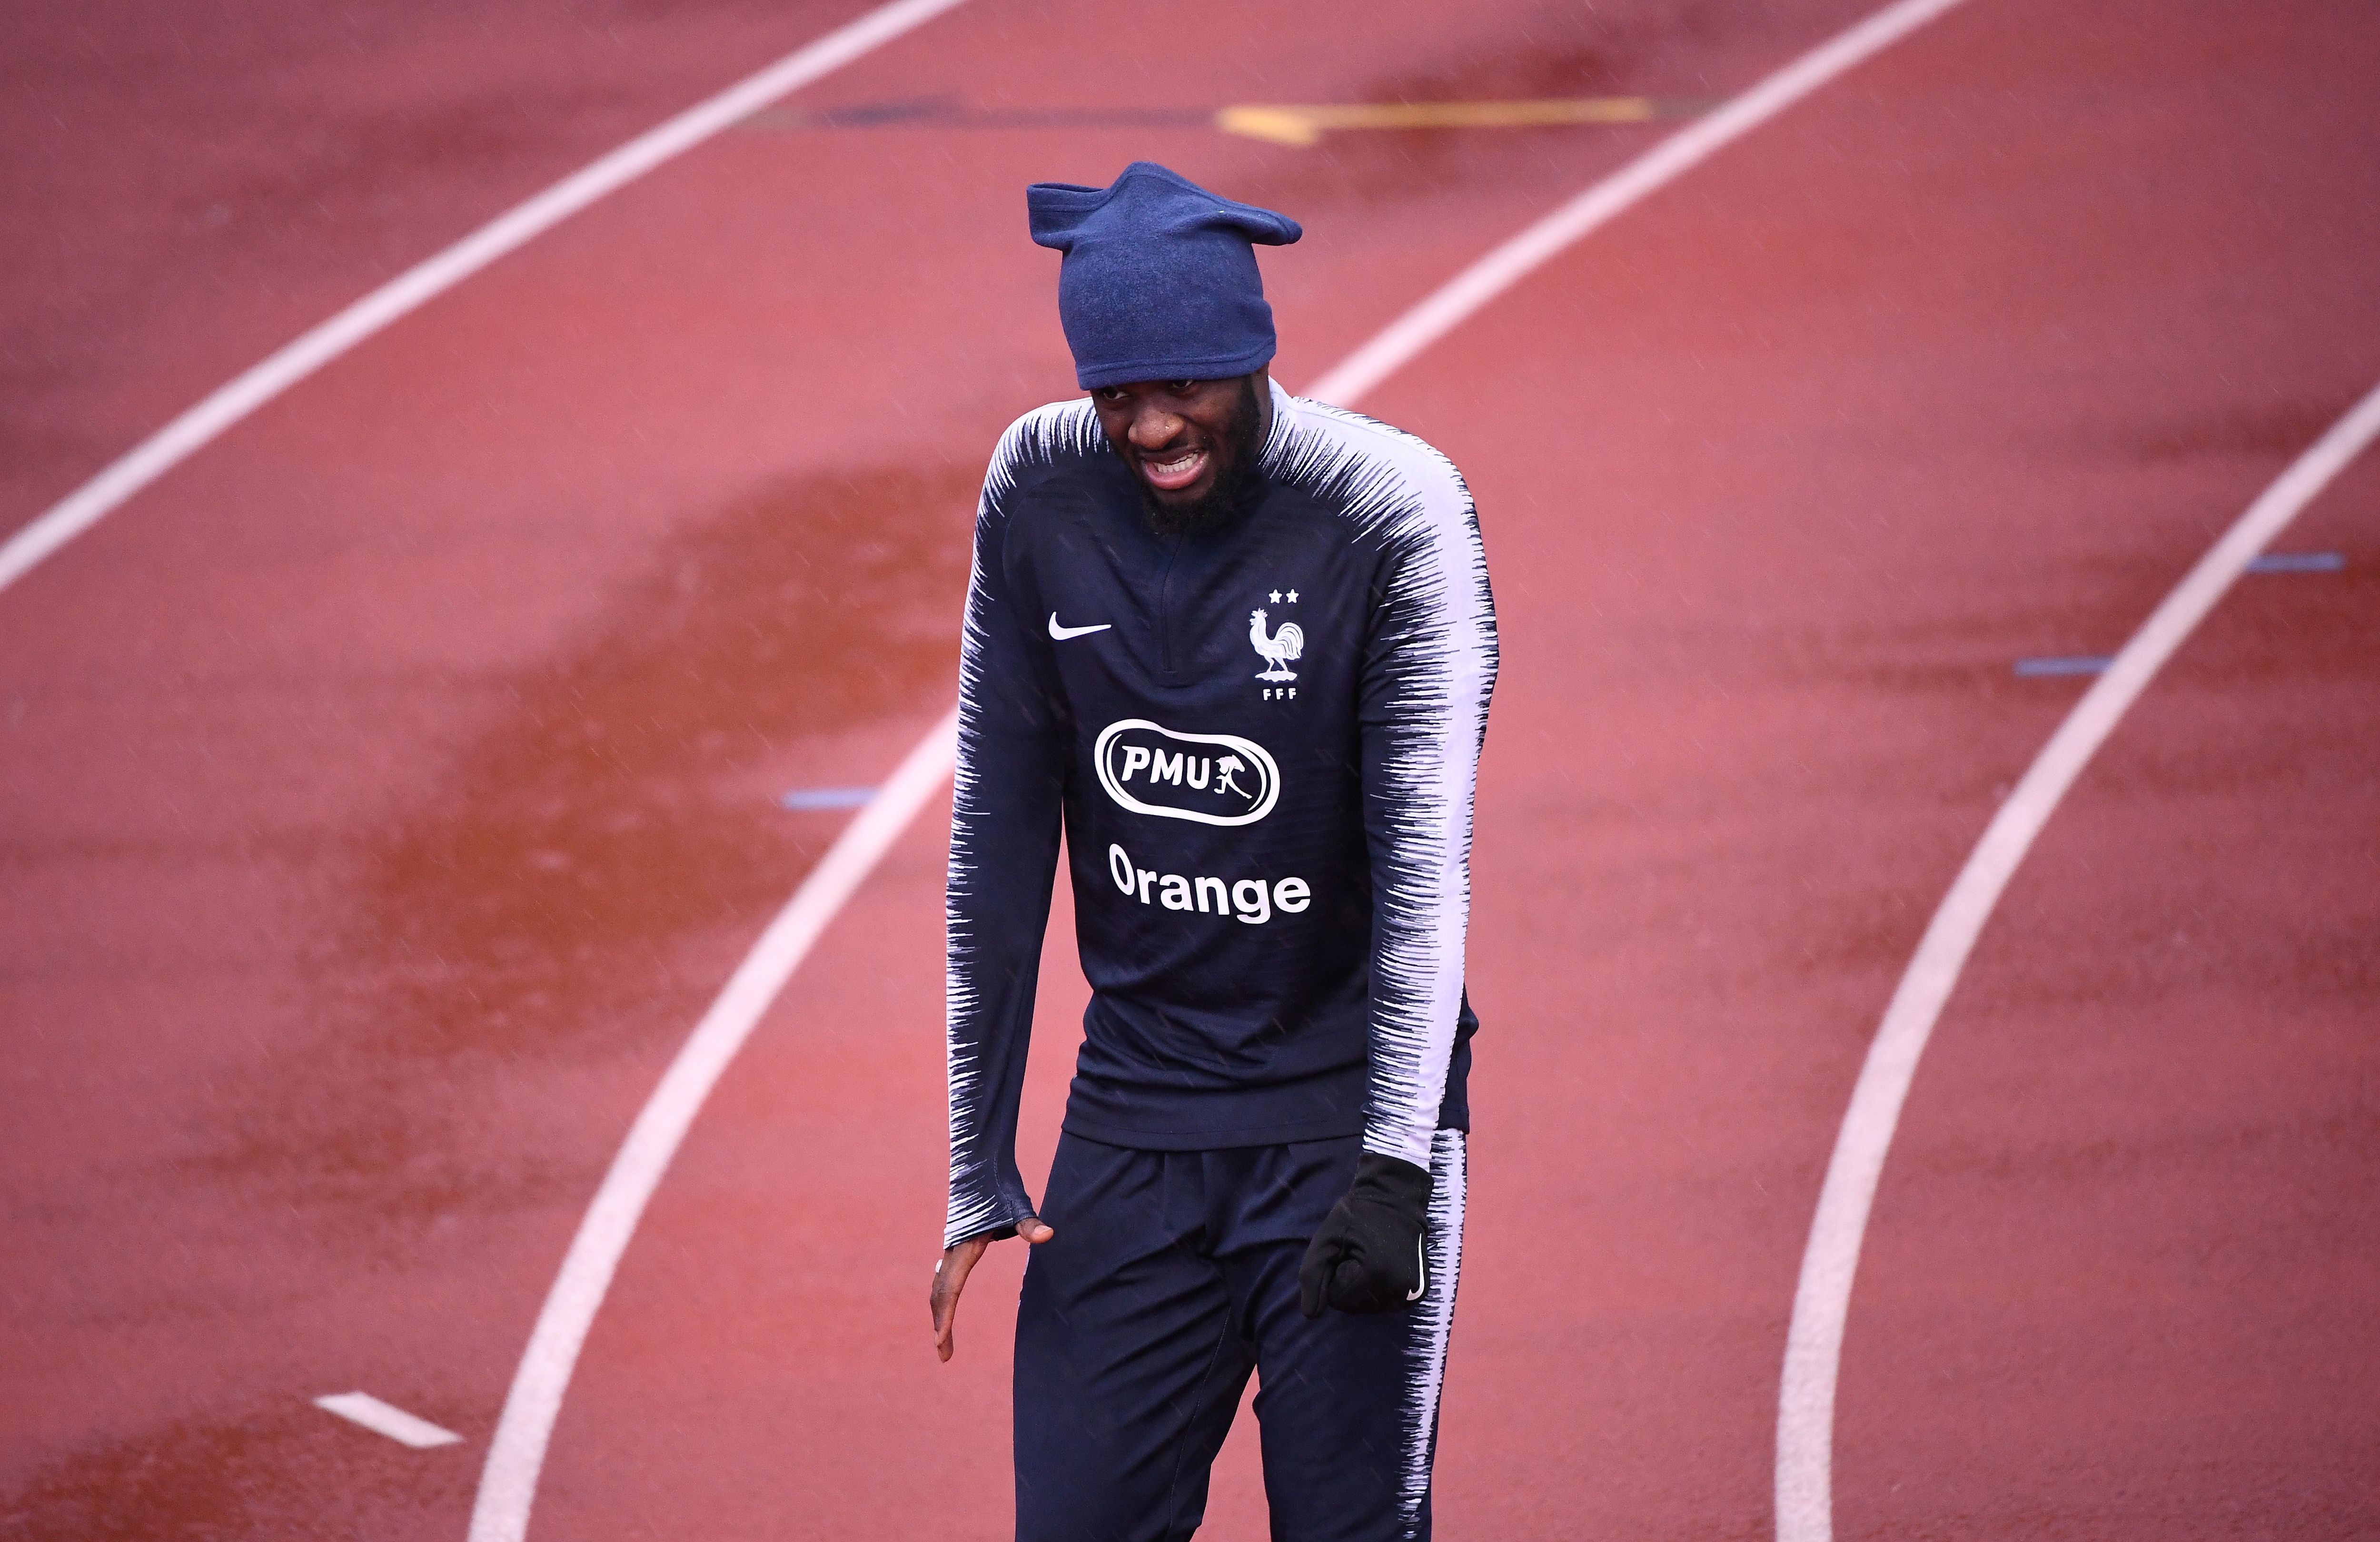 France's midfielder Tanguy Ndombele reacts before  a training session in Clairefontaine-en-Yvelines, southwest of Paris, on March 18, 2019, as part of the team's preparation for the upcoming UEFA Euro 2020 Group H qualifying football matches against Moldova and Iceland. - France plays against Moldova on March 22 and Iceland March 25, 2019. (Photo by FRANCK FIFE / AFP)        (Photo credit should read FRANCK FIFE/AFP/Getty Images)